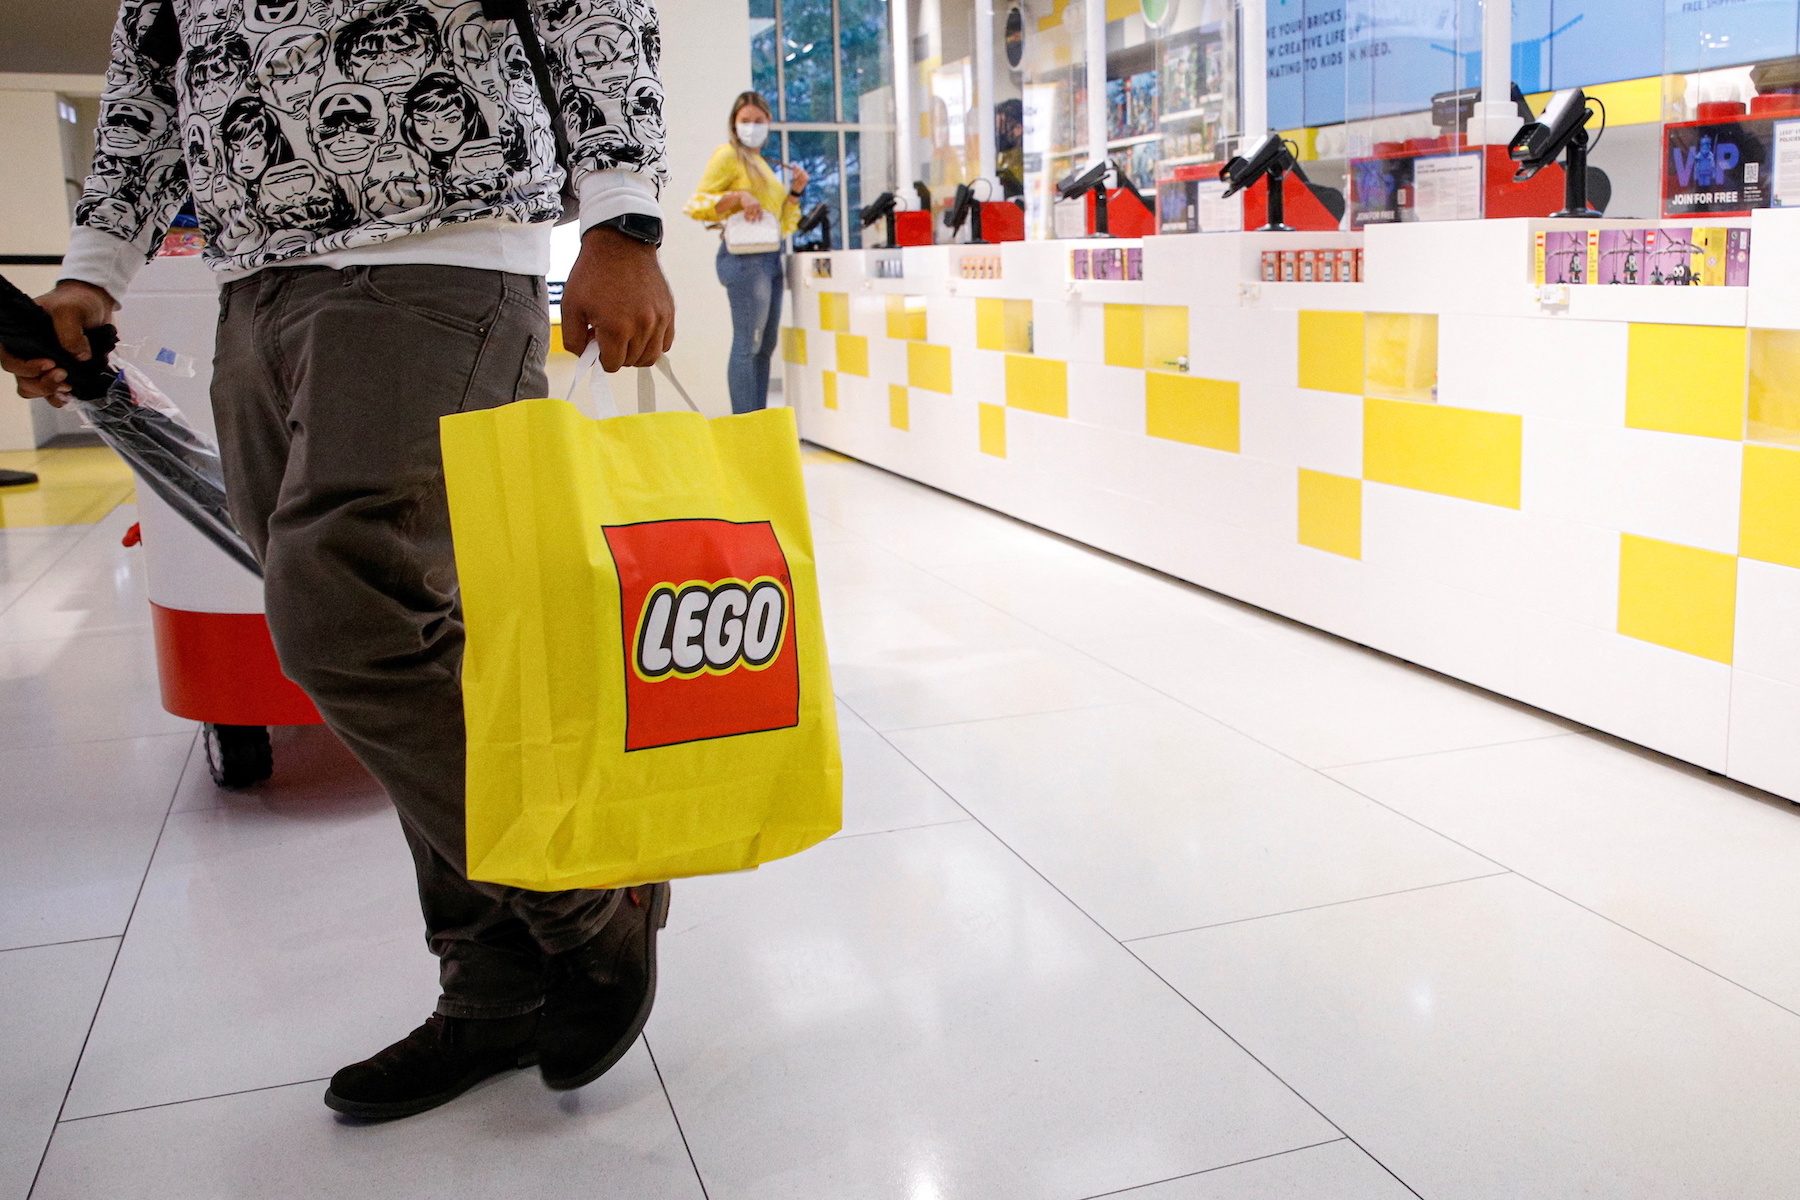 Lego sales jump 27% in 2021, boosted by new China stores